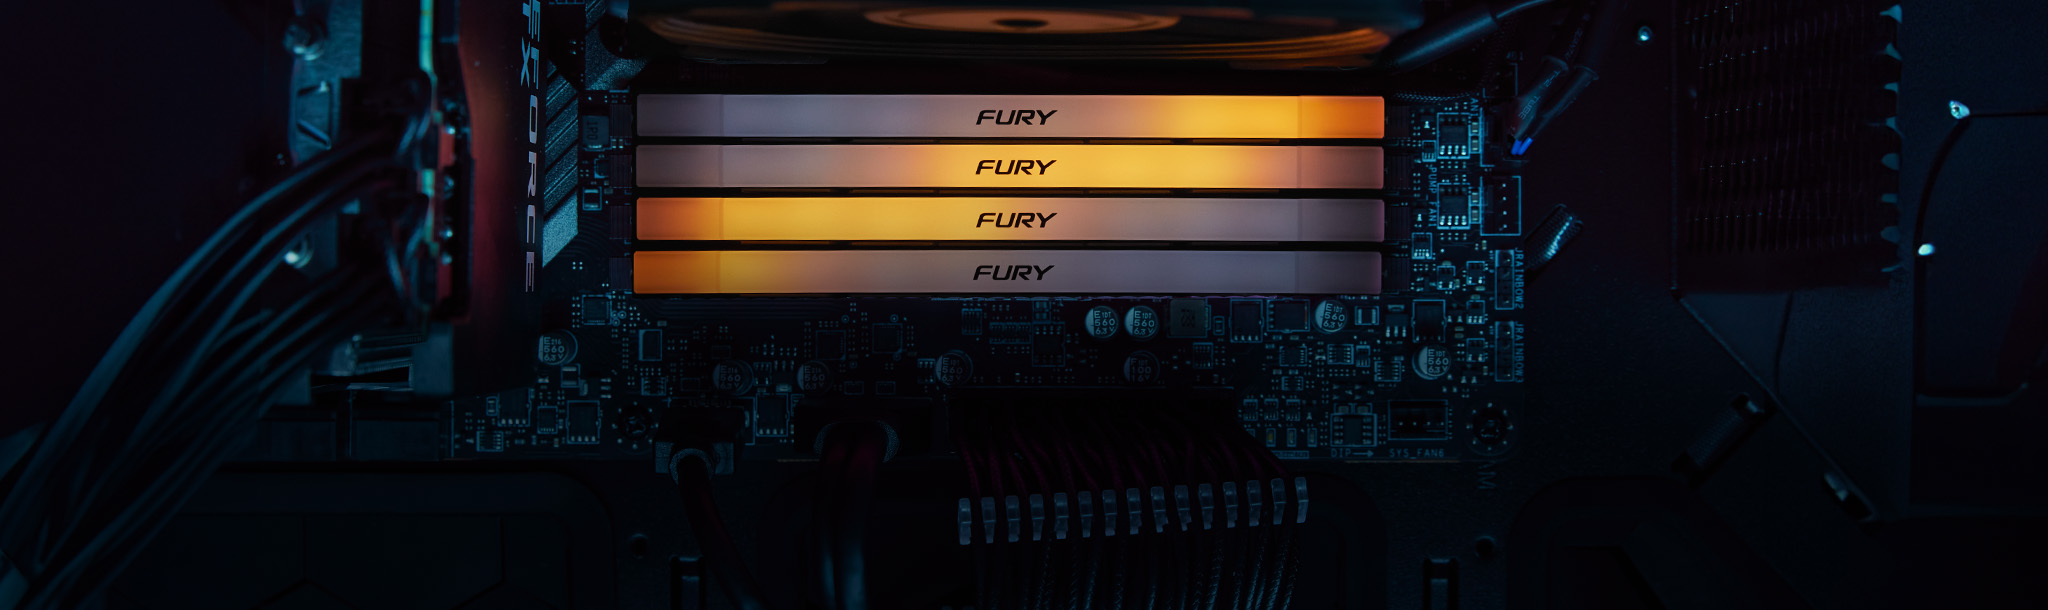 Kingston FURY Renegade DDR4 RGB module with different colors in motherboard